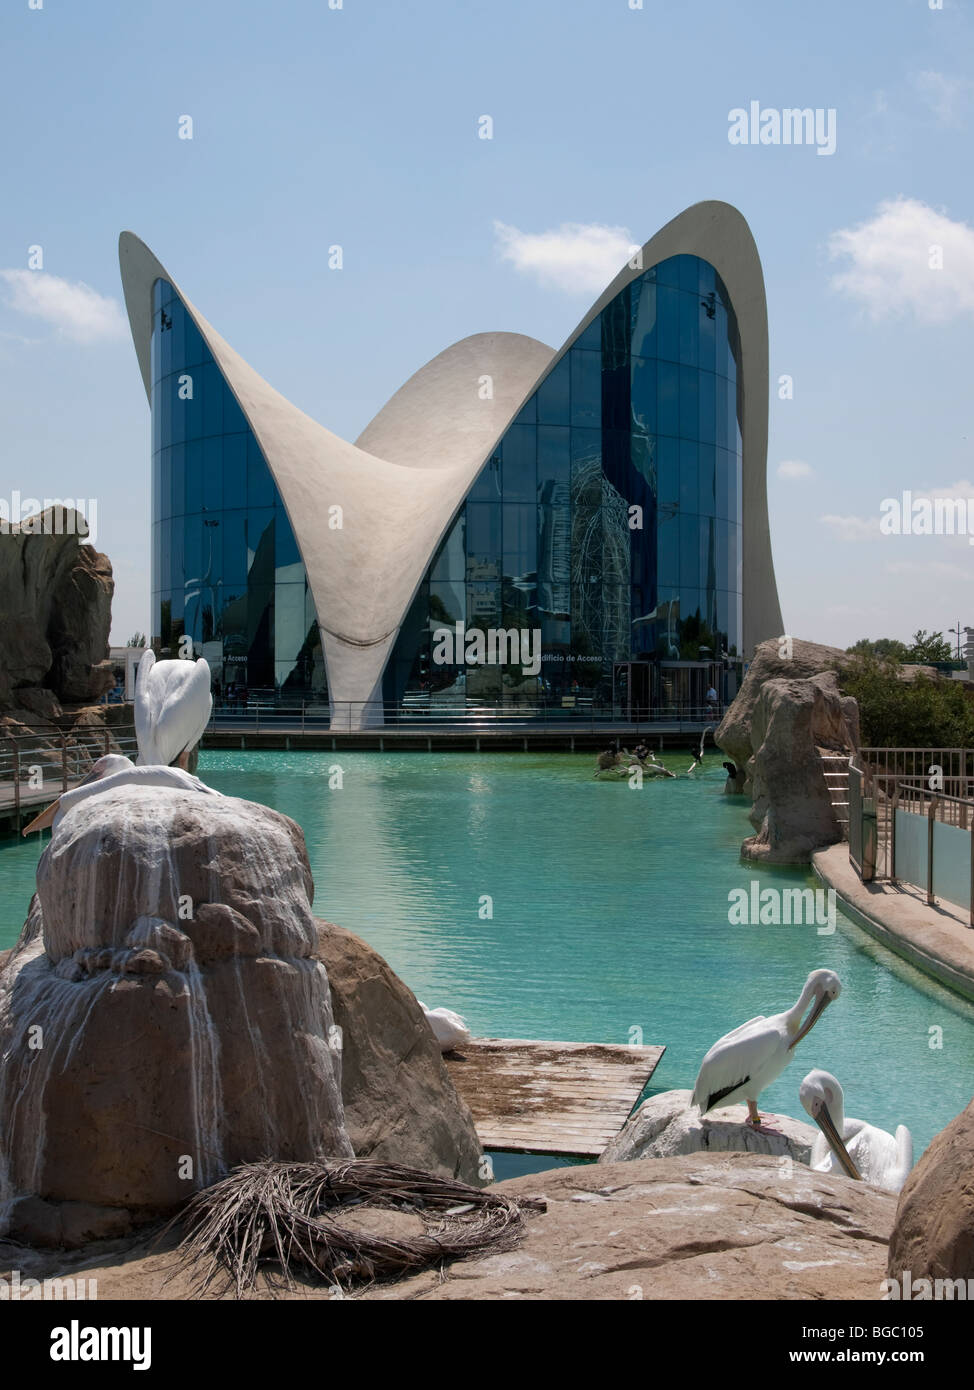 The Oceanográfico of the City of Arts and Sciences, Valencia, Spain Stock Photo